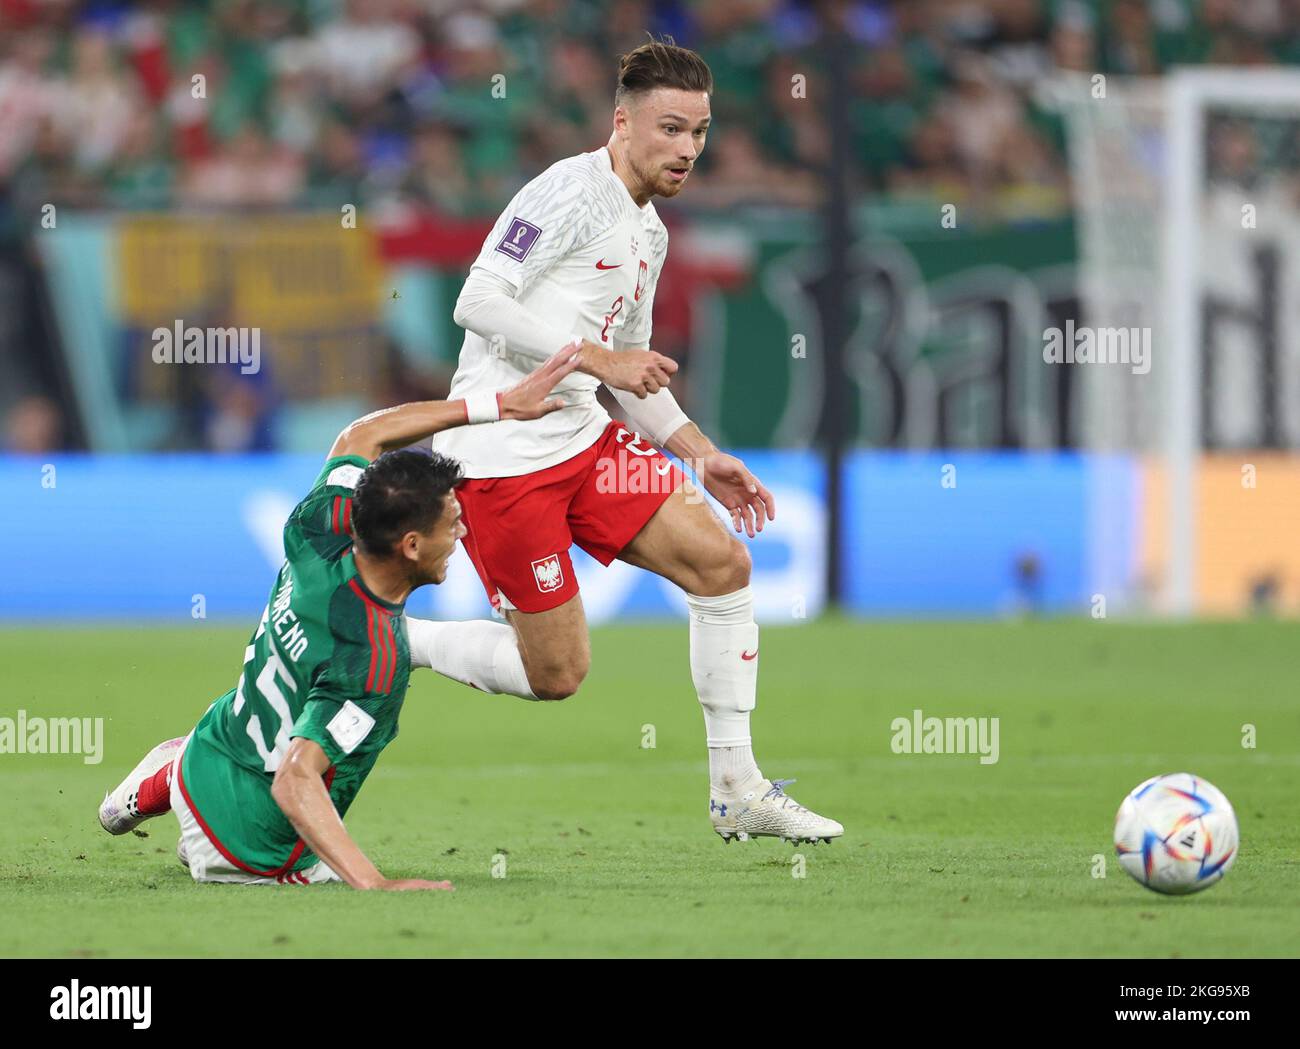 Doha, Qatar. 22nd Nov, 2022. Hector Moreno (L) of Mexico vies with Matty Cash of Poland during the Group C match between Mexico and Poland of the 2022 FIFA World Cup at Ras Abu Aboud (974) Stadium in Doha, Qatar, Nov. 22, 2022. Credit: Jia Haocheng/Xinhua/Alamy Live News Stock Photo